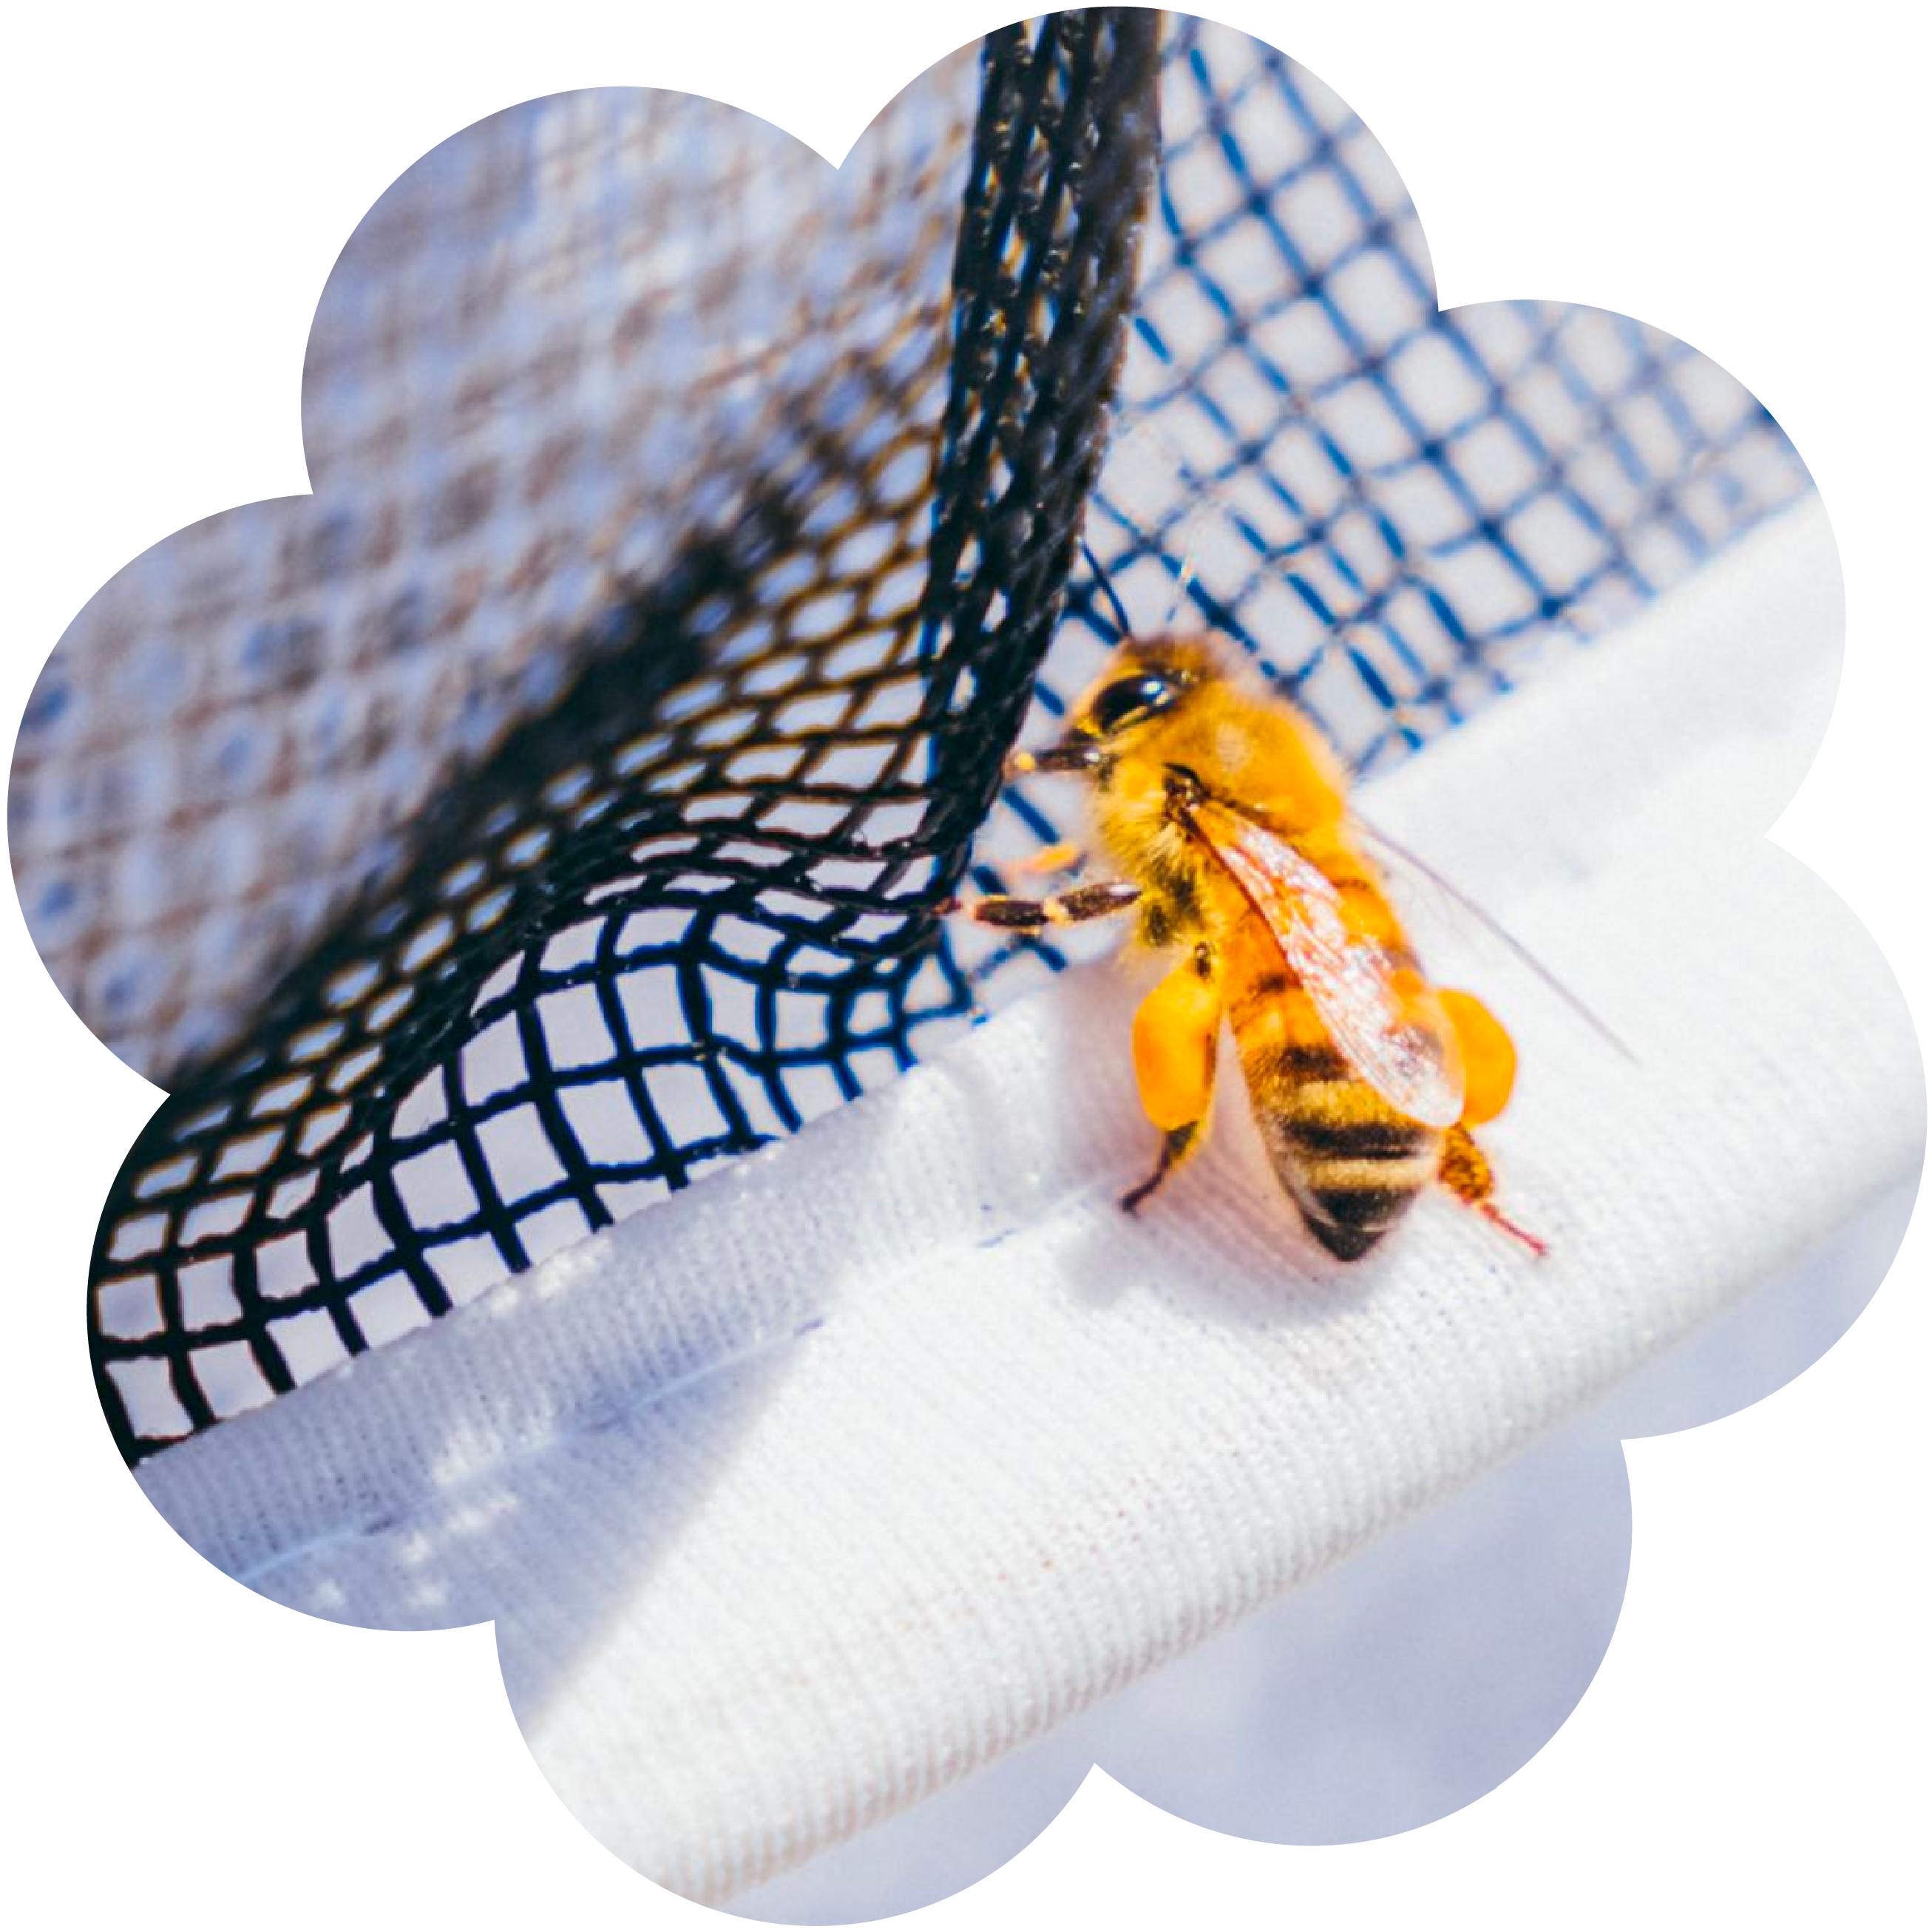 Corporate beekeeping services include honey bees, like the one pictured here, with yellow pollen stuck on its legs.